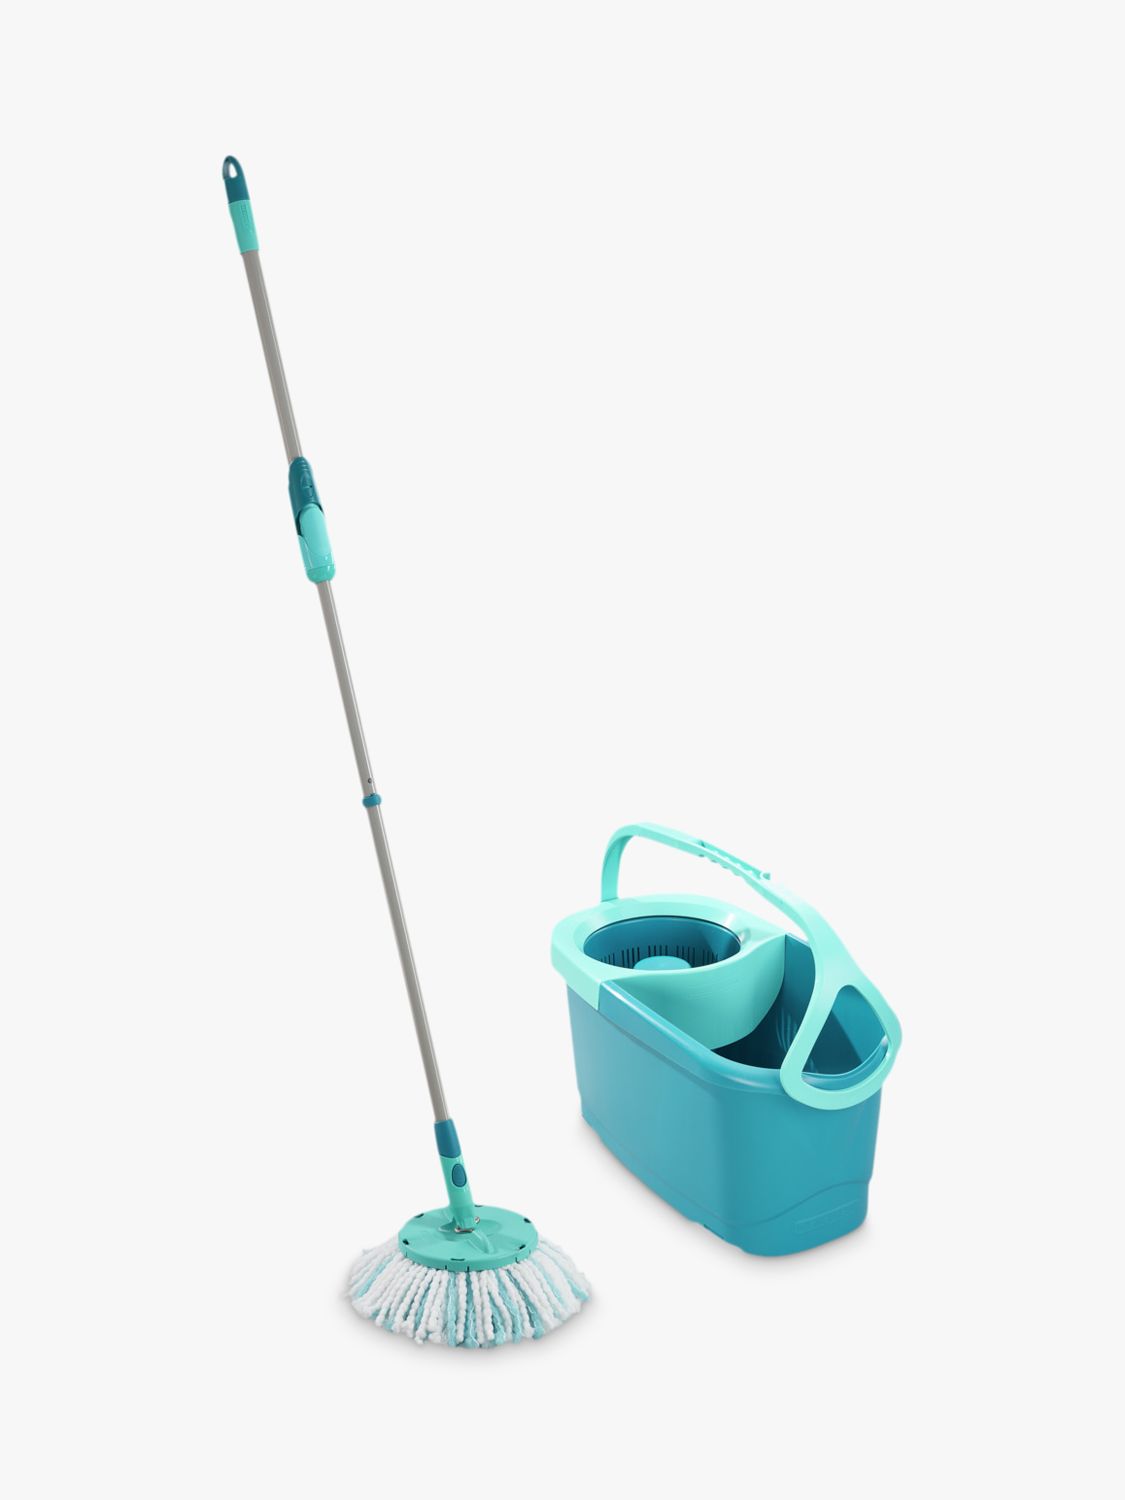 Ultra Absorbent Micro Fibre Mop Head Washable at 60° Leifheit Replacemant mop head Power Mop 3in1 8,5 x 8,5 x 31cm Turquoise Power Pick up 